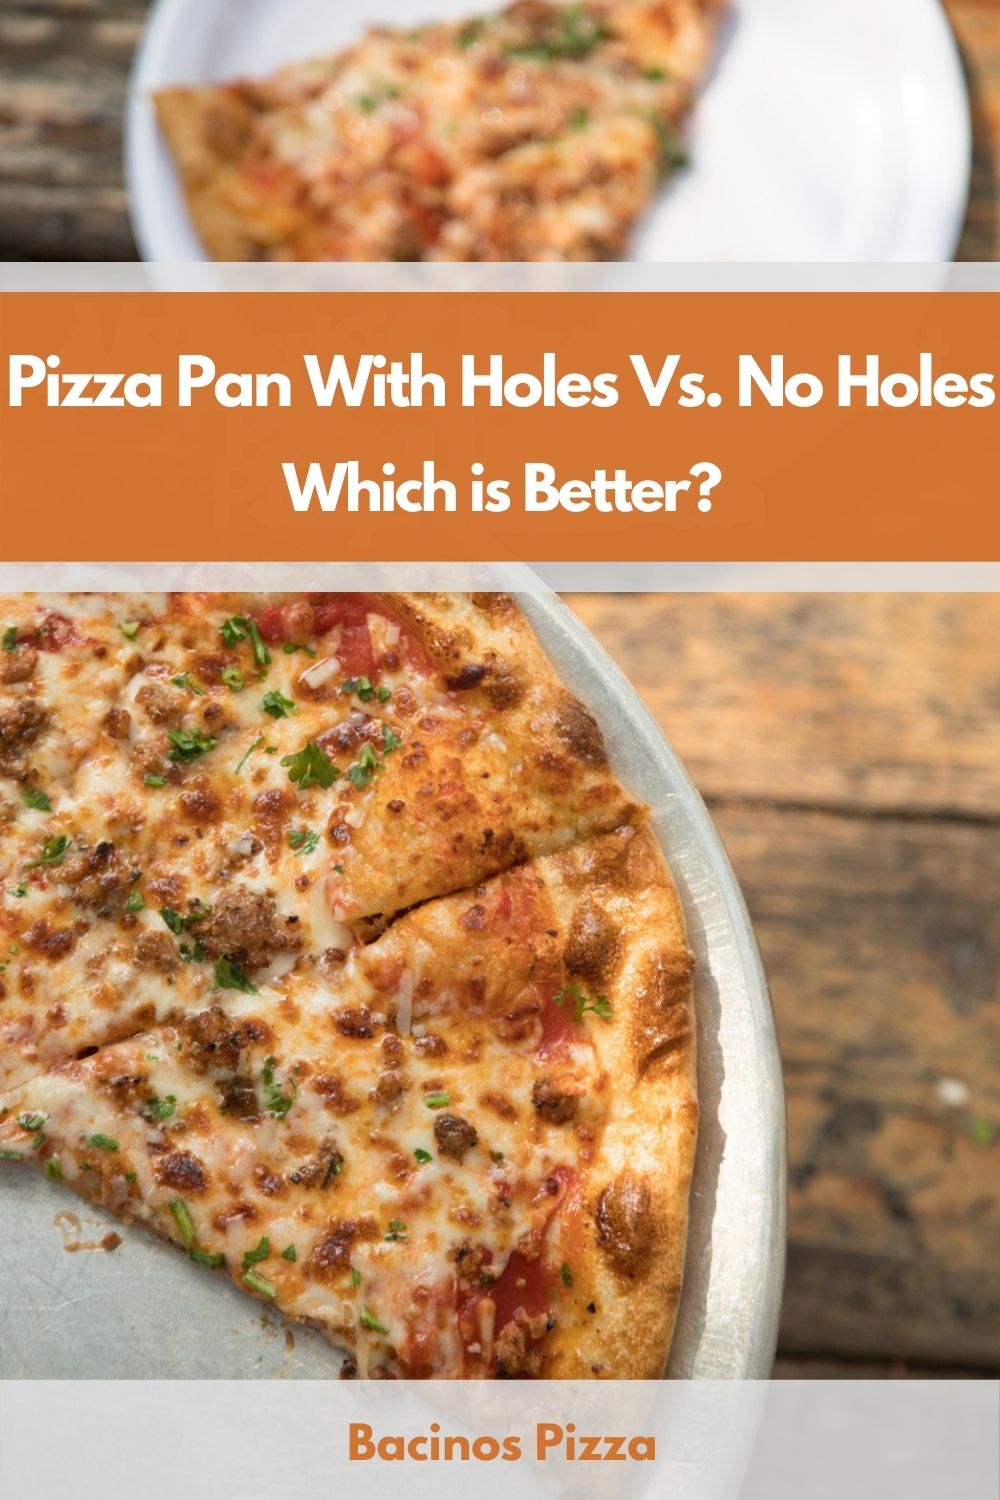 Pizza Pan With Holes Vs. No Holes Which is Better pin